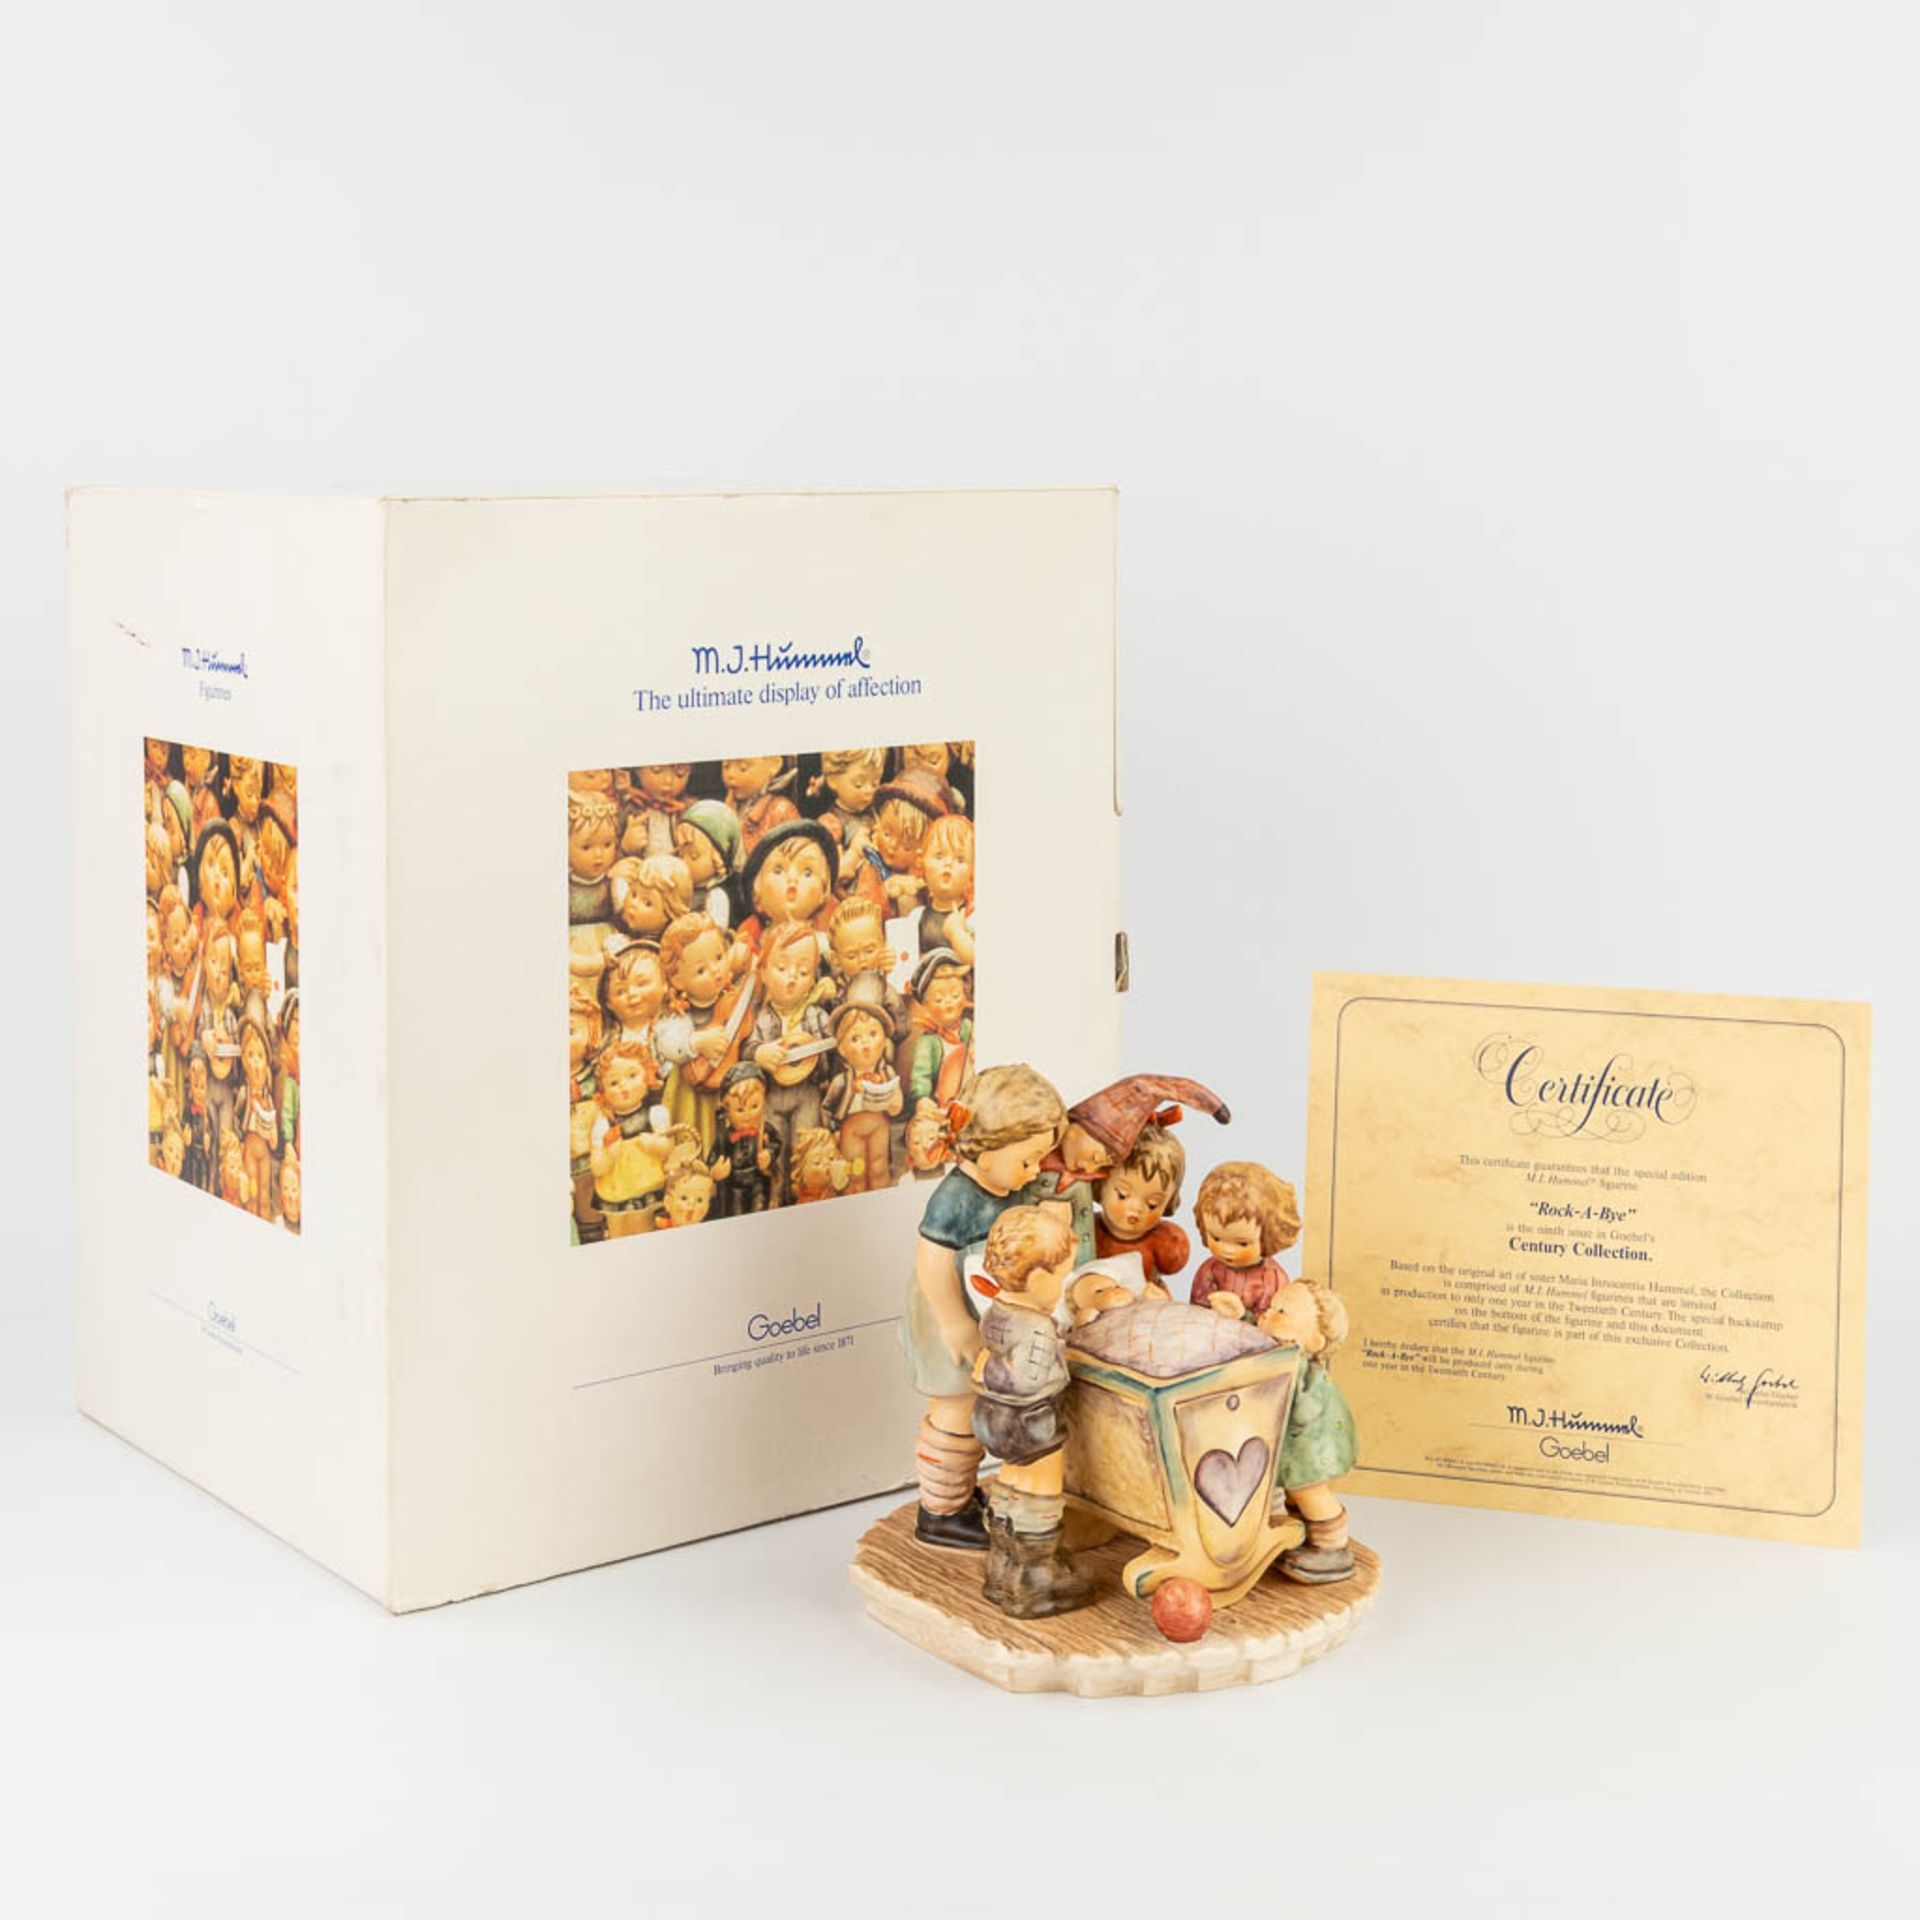 Hummel, 'Rock-A-Bye' Century collection, with the original box. 1994. (H: 19 cm) - Image 3 of 18